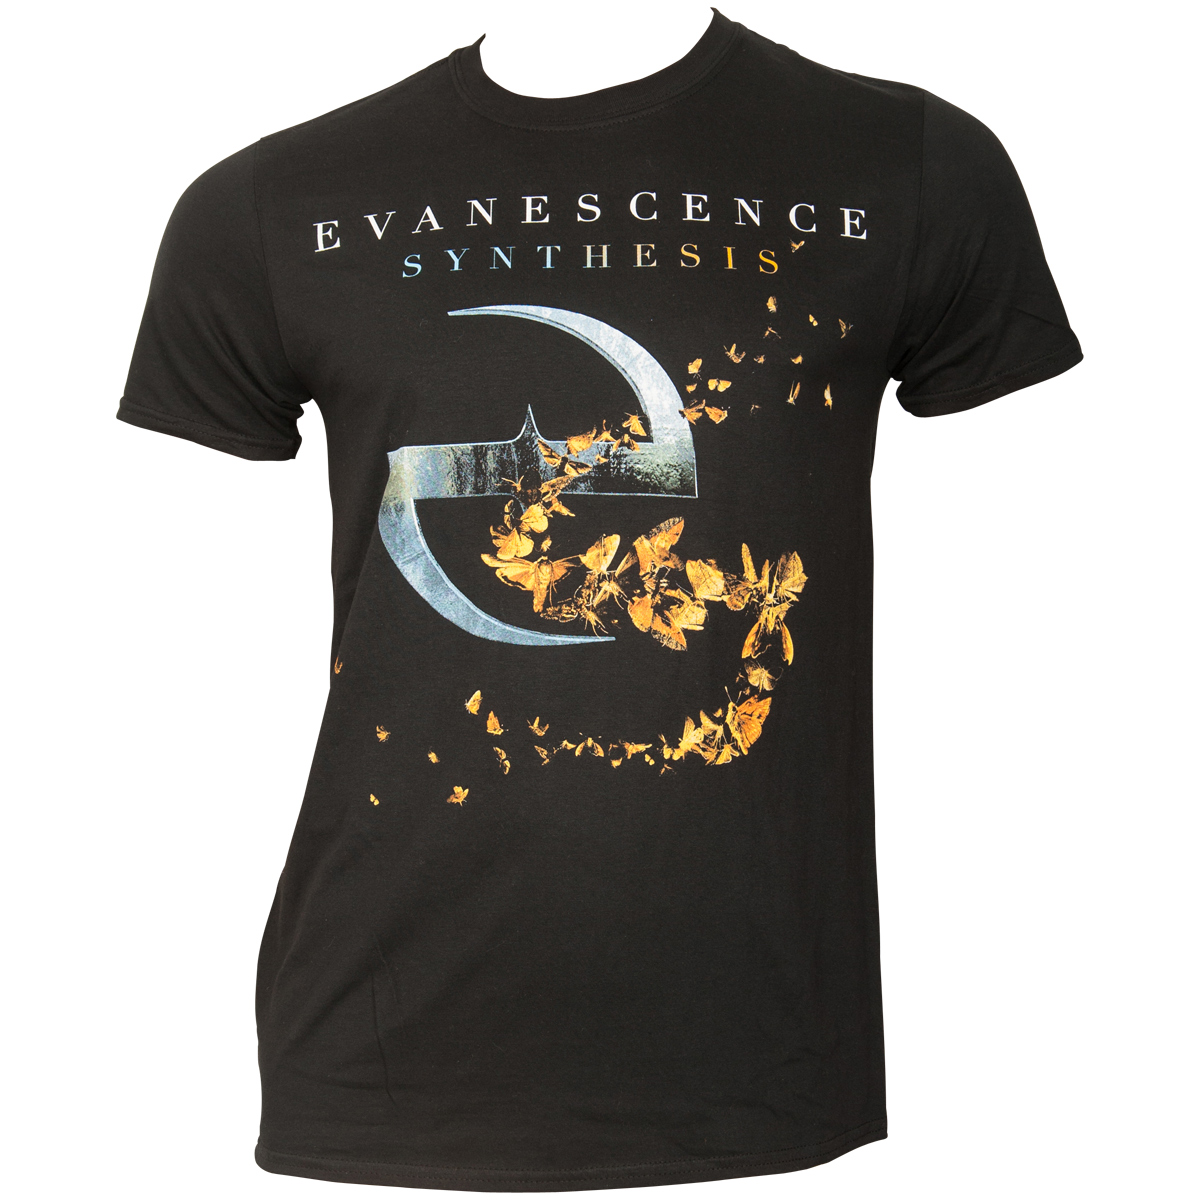 Evanescence - T-Shirt Synthesis - schwarz